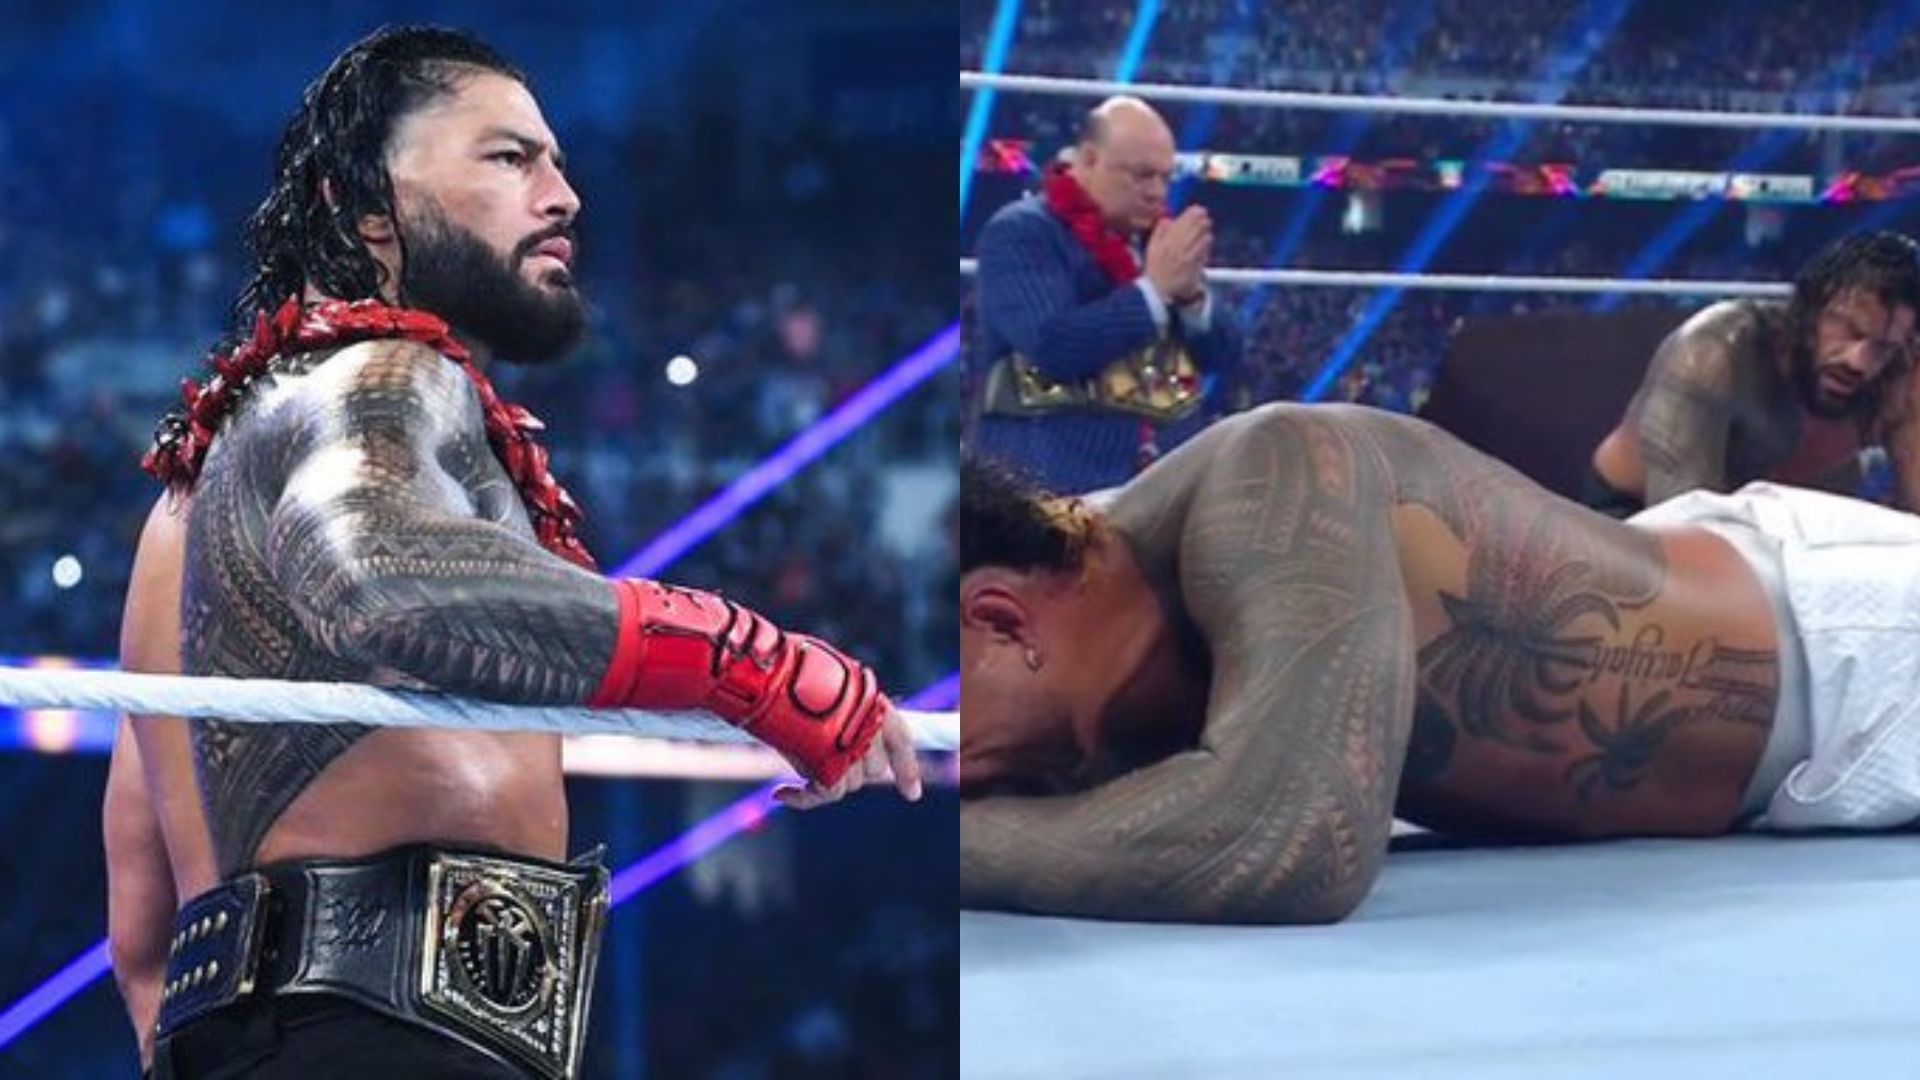 Roman Reigns defeated Jey Uso in the main event of SummerSlam